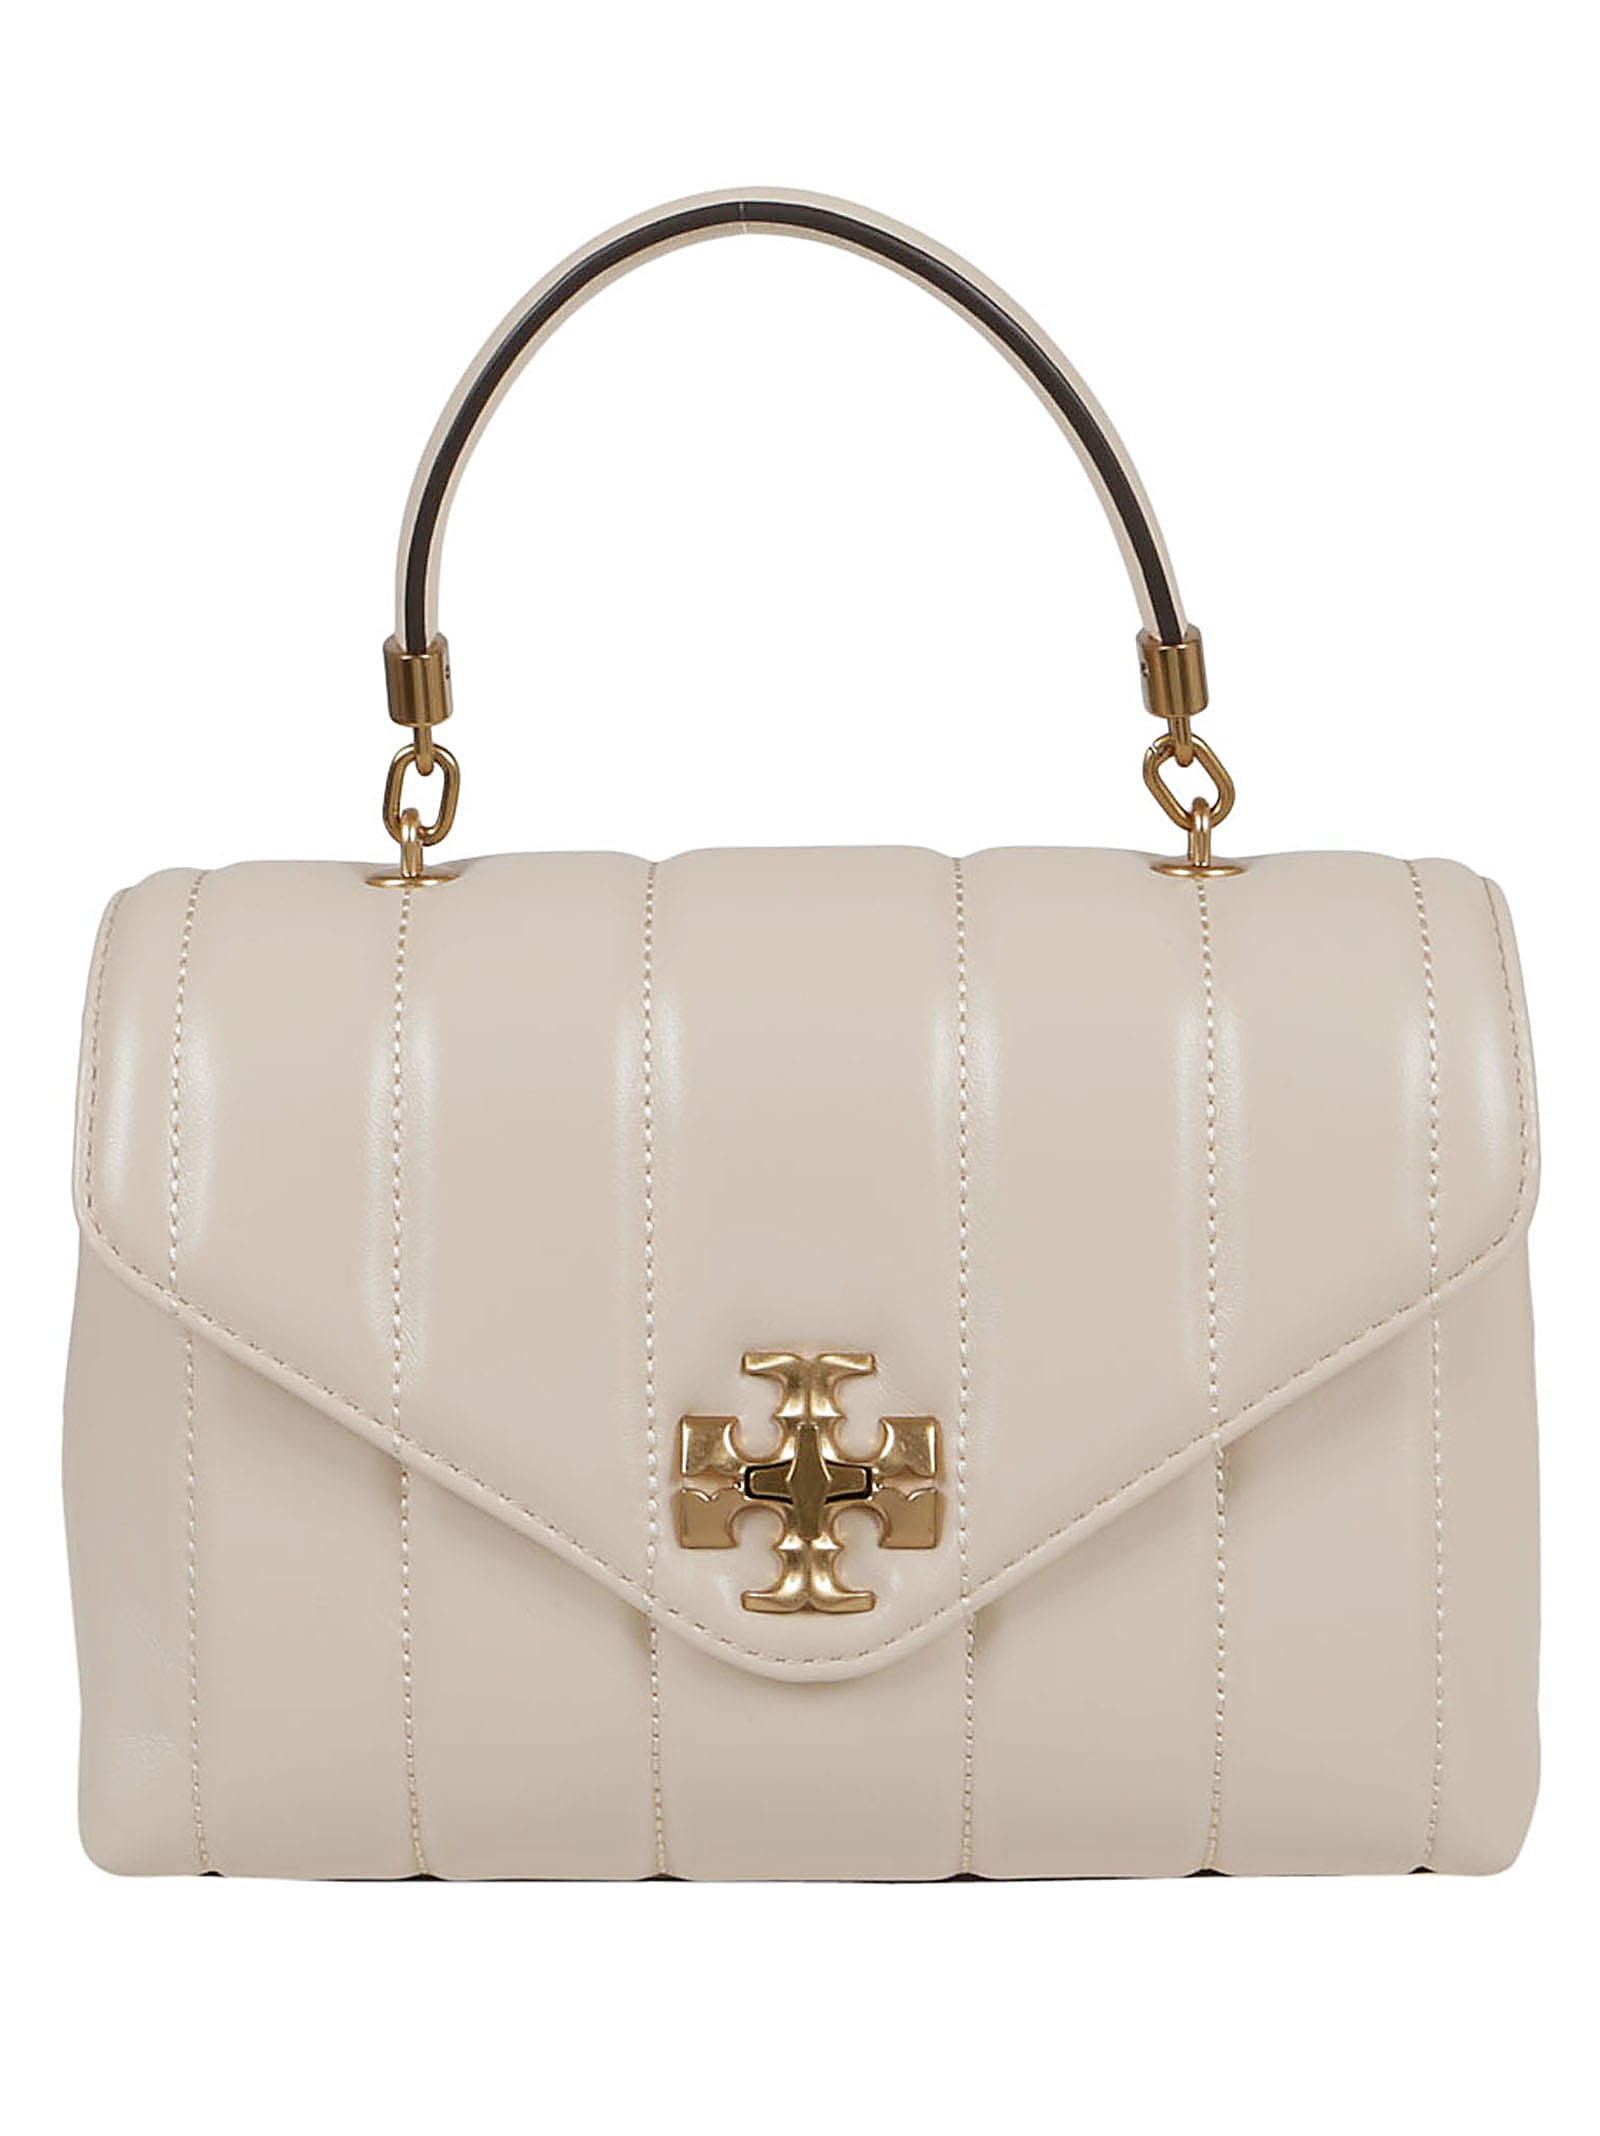 TORY BURCH EMERSON SMALL TOP SATCHEL, BOUGHT IT IN THE MALL FIRENZE